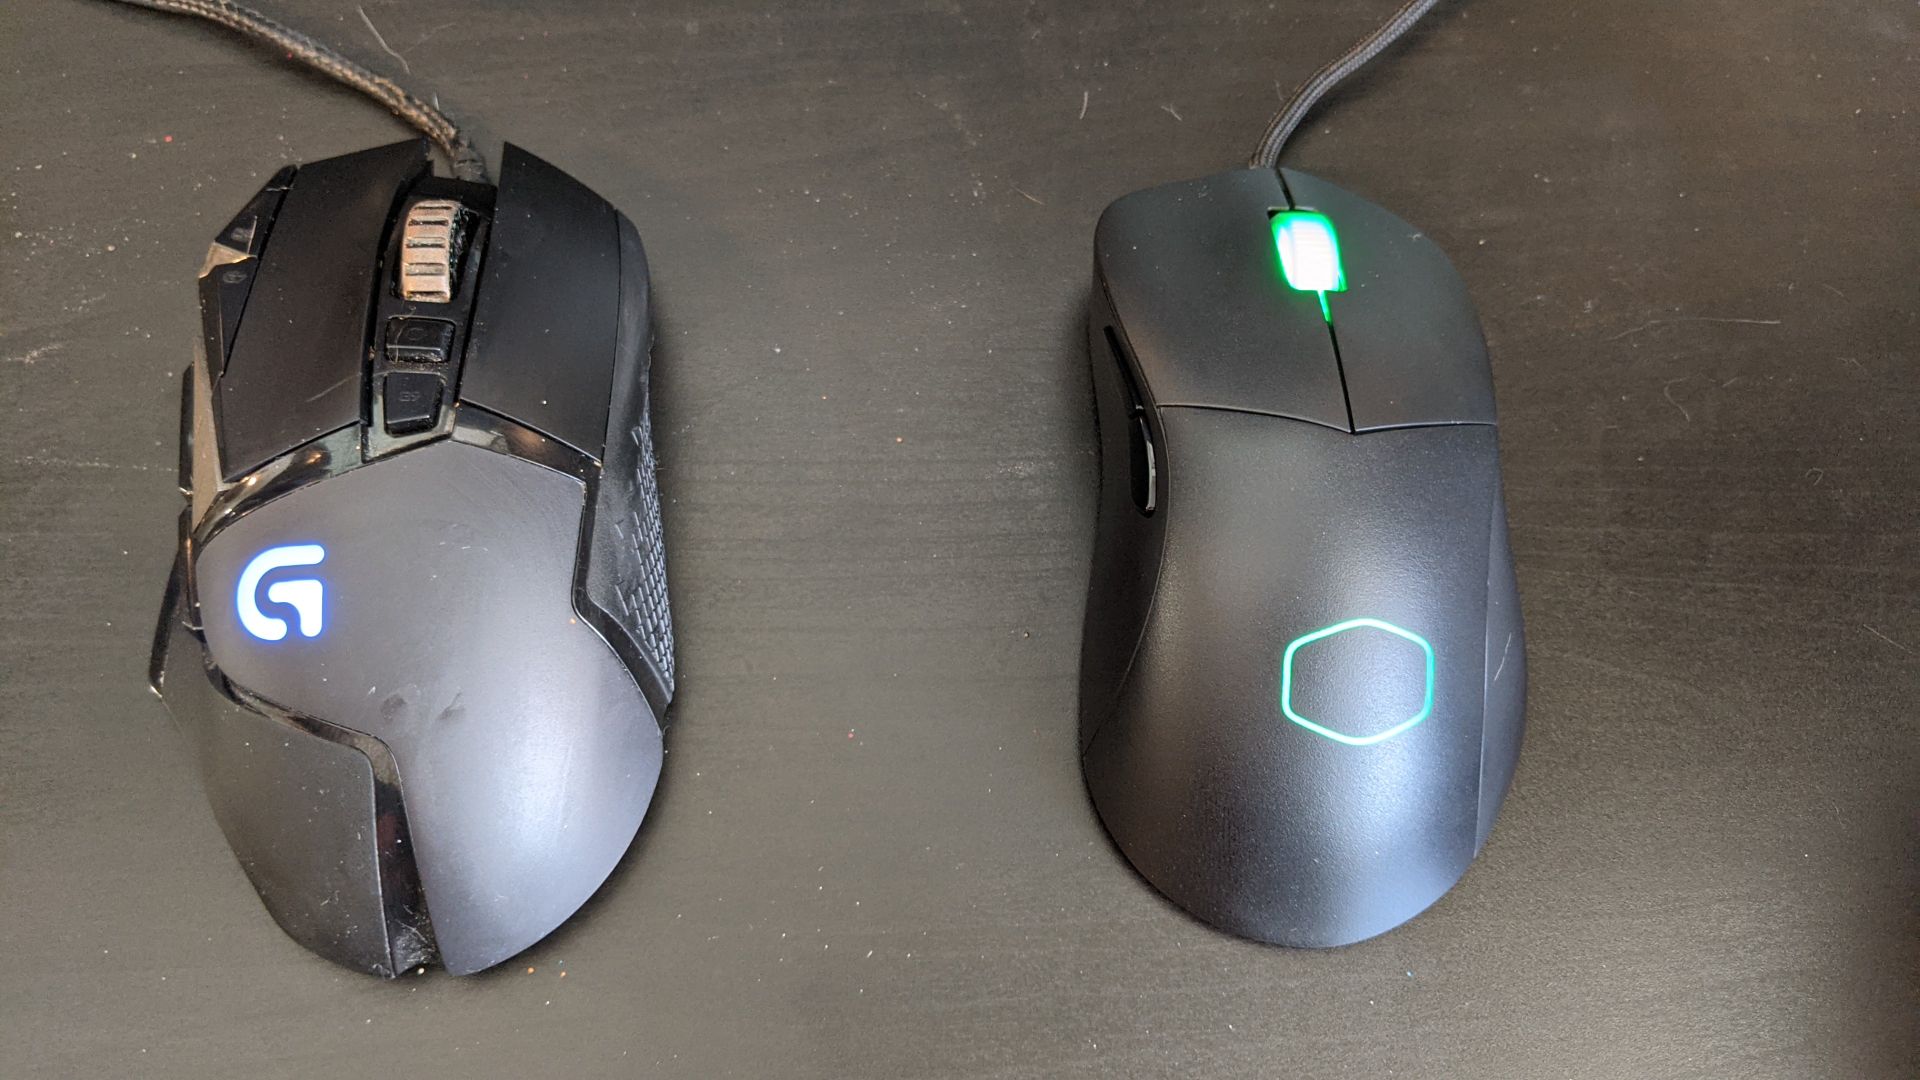 MM730 and G502